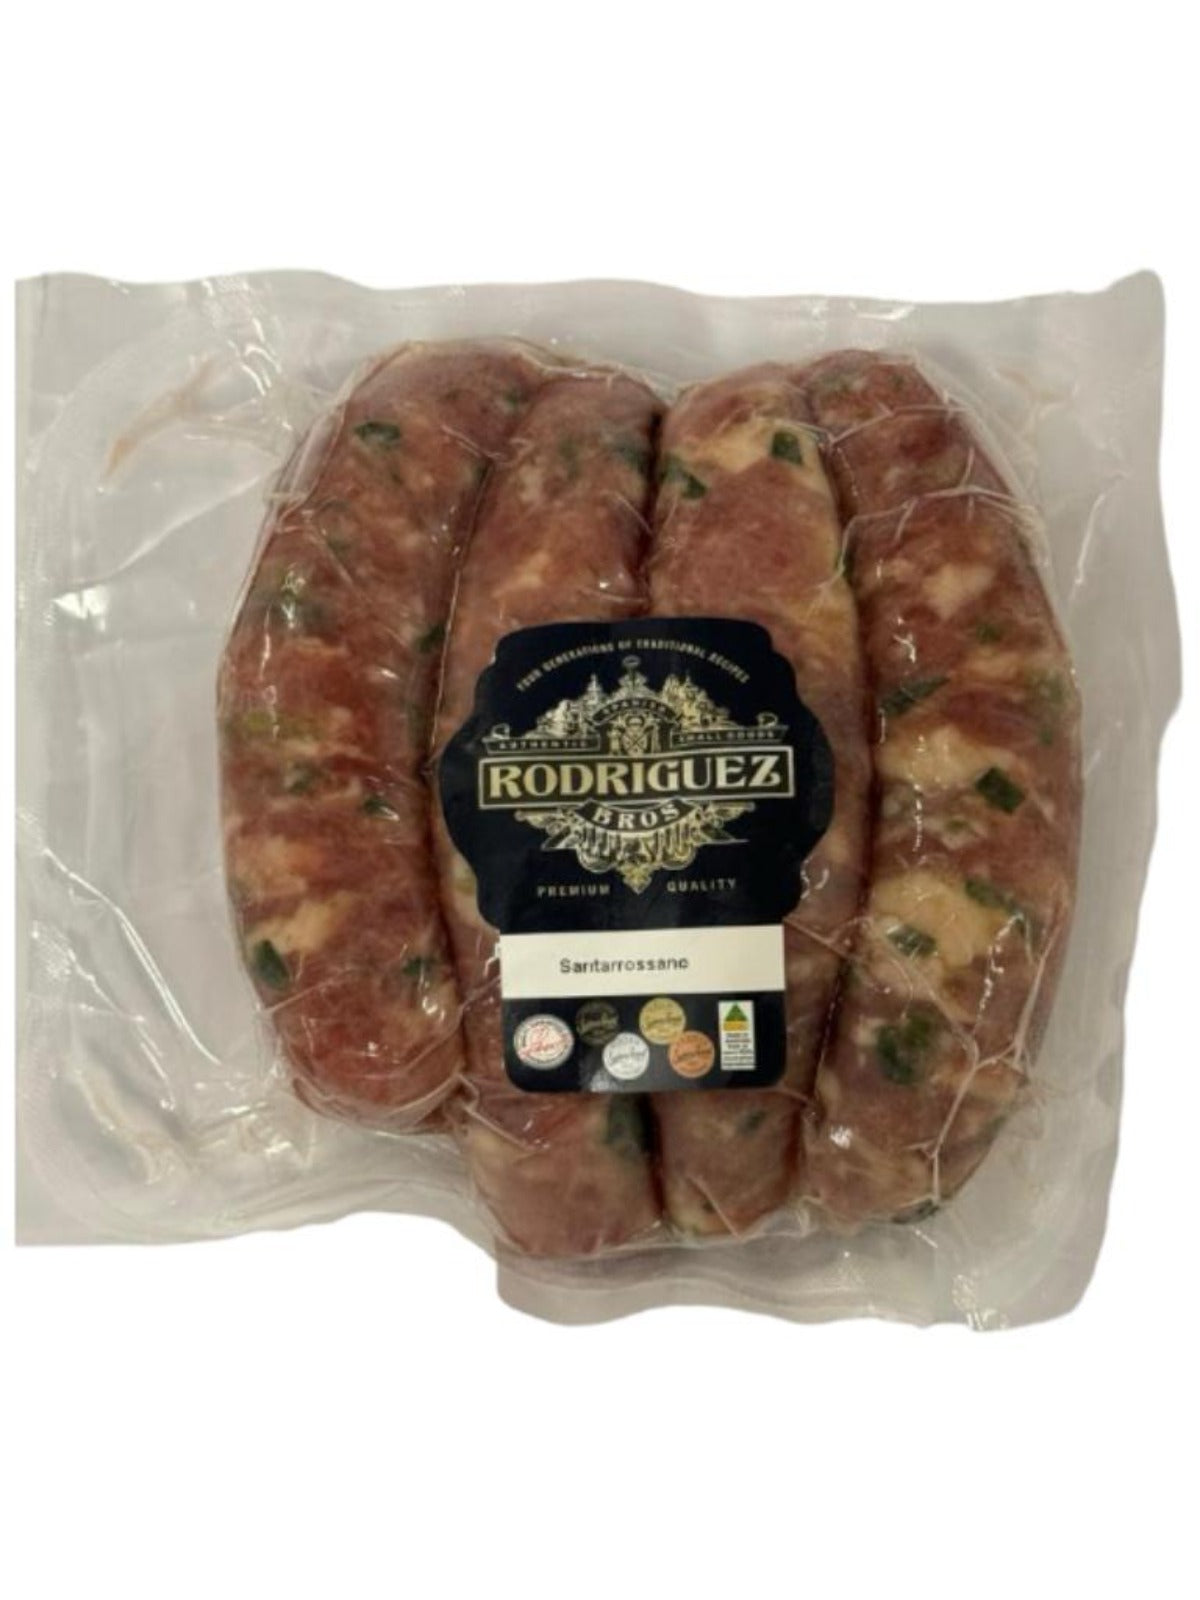 AVAILABLE IN STORE ONLY - Columbian Santarossana Chorizo. 4 piece pack. Frozen